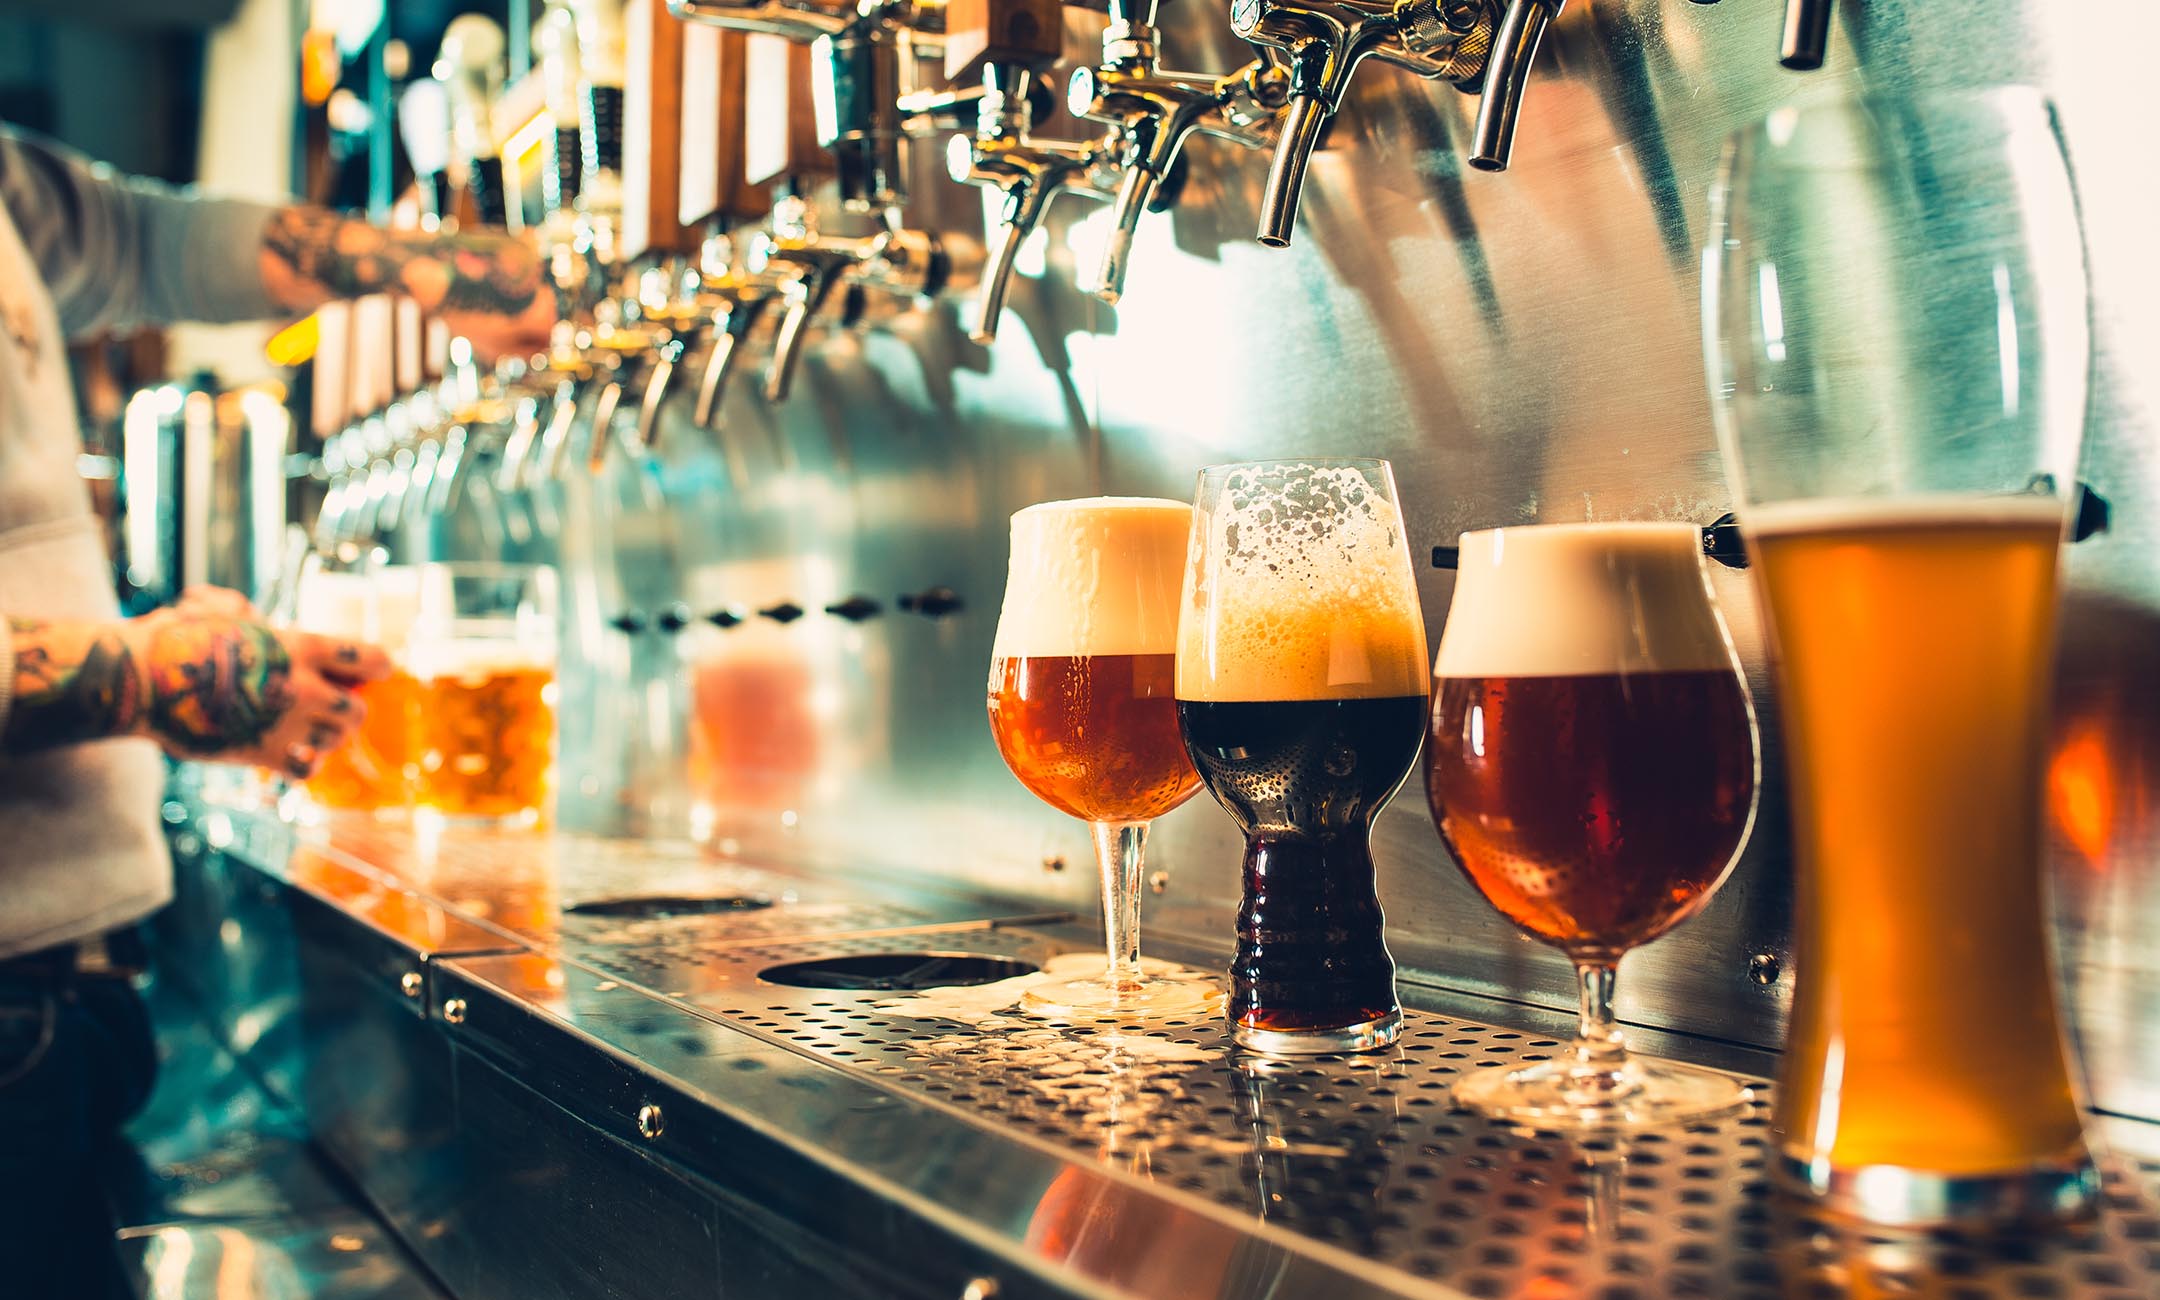 Four glasses of draft beer of different varieties in the forefront with a bartender pouring another glass of draft beer in the background